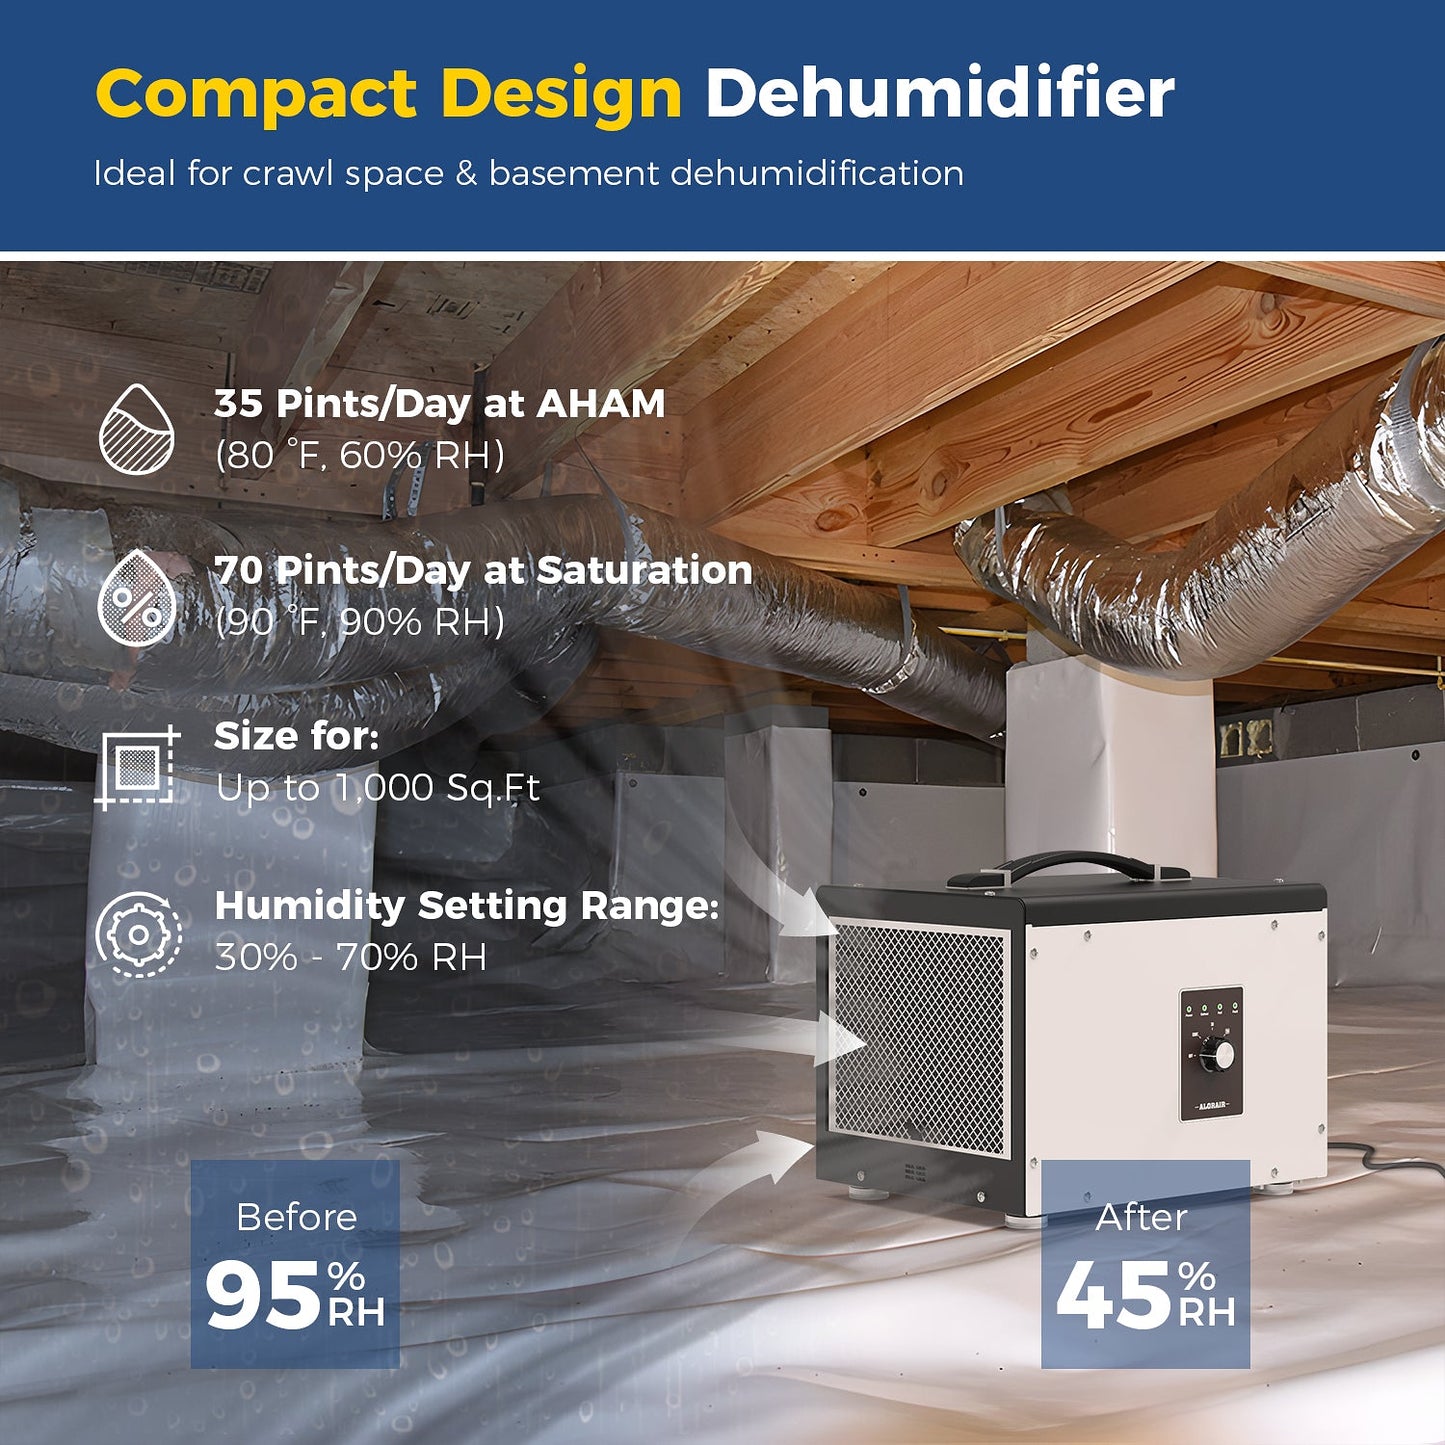 AlorAir Sentinel HS35 70 Pint Crawl Space Dehumidifier with Drain Hose, Automatic Defrost, Up to 1000 Sq. Ft. Commercial Dehumidifier w/ Energy Star Certified, ETL Listed AlorAir